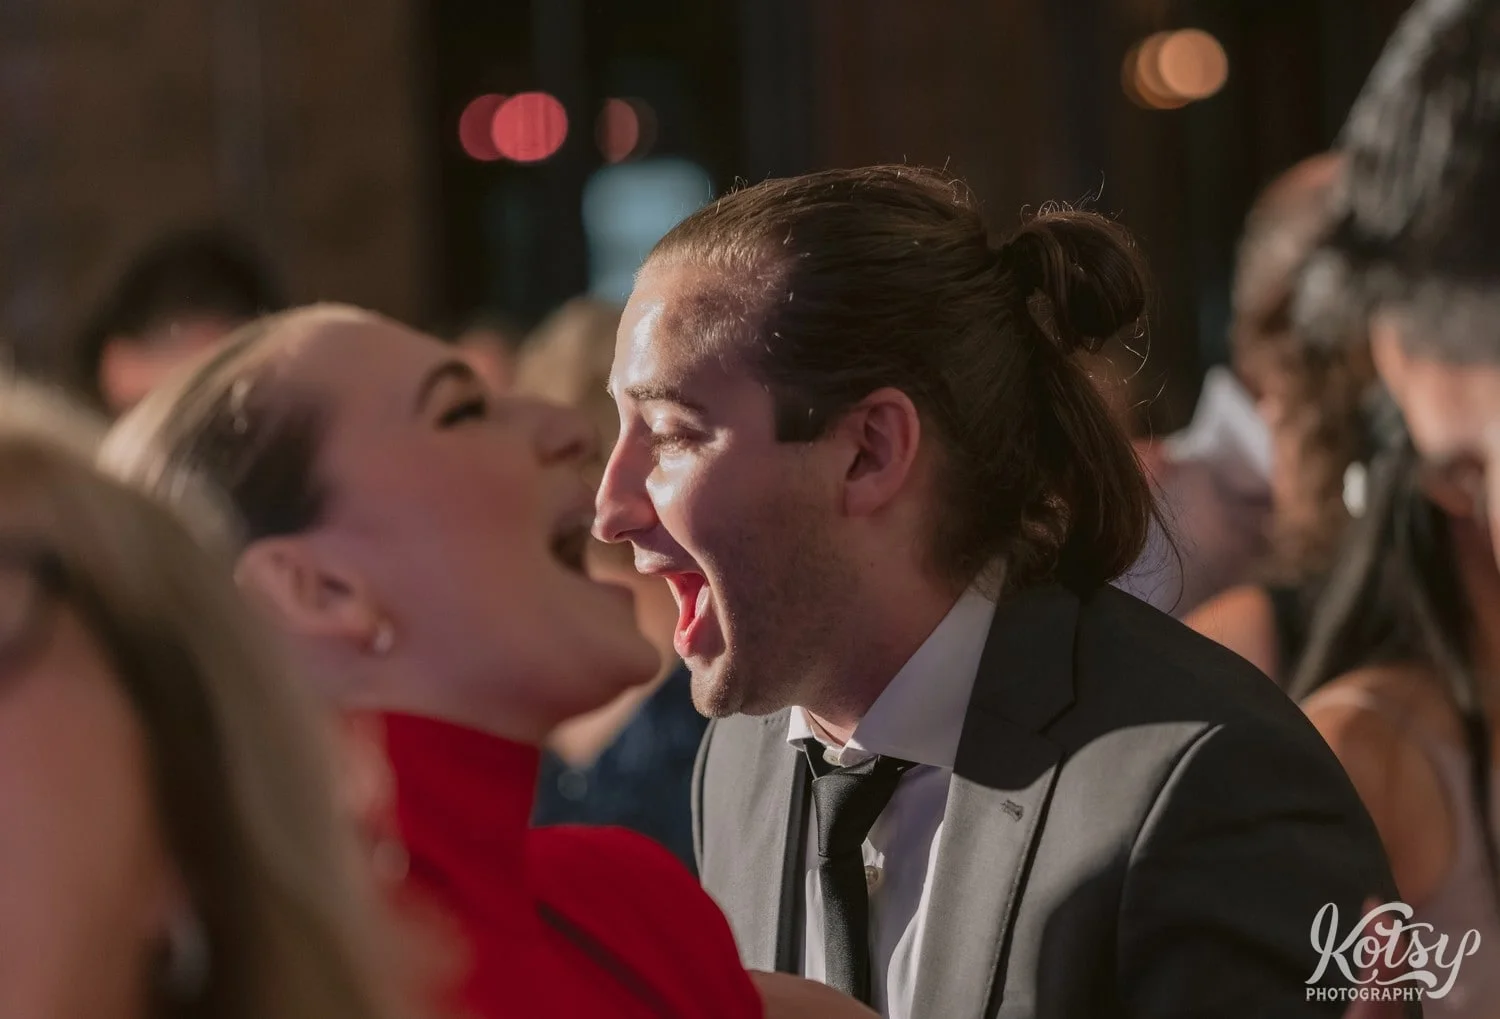 A close up shot of a man and a woman at different distances with their mouth open dancing During a Second Floor Events wedding reception in Toronto, Canada.